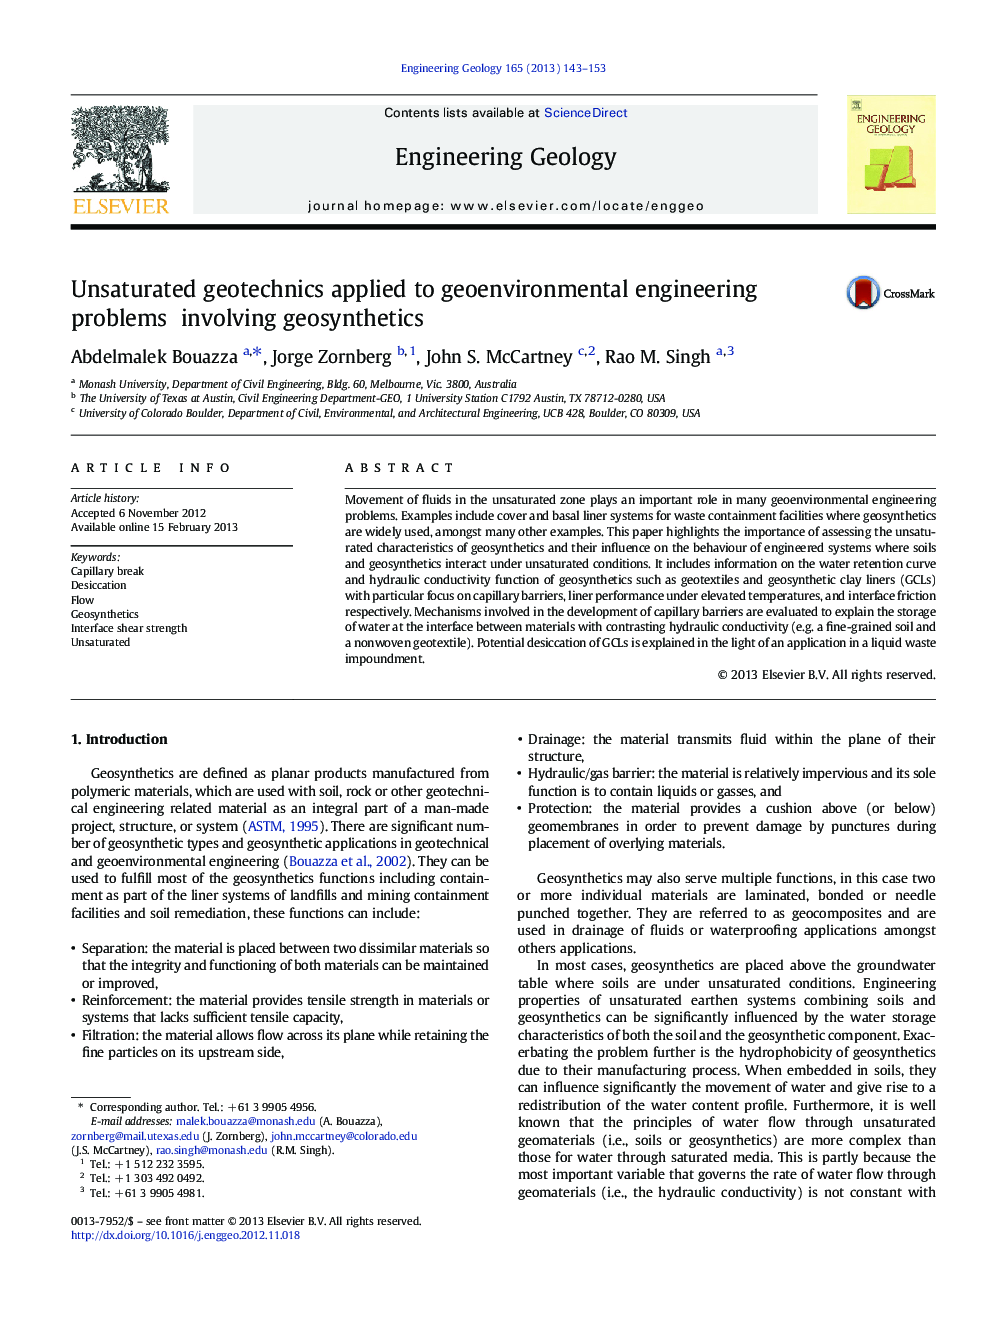 Unsaturated geotechnics applied to geoenvironmental engineering problems involving geosynthetics